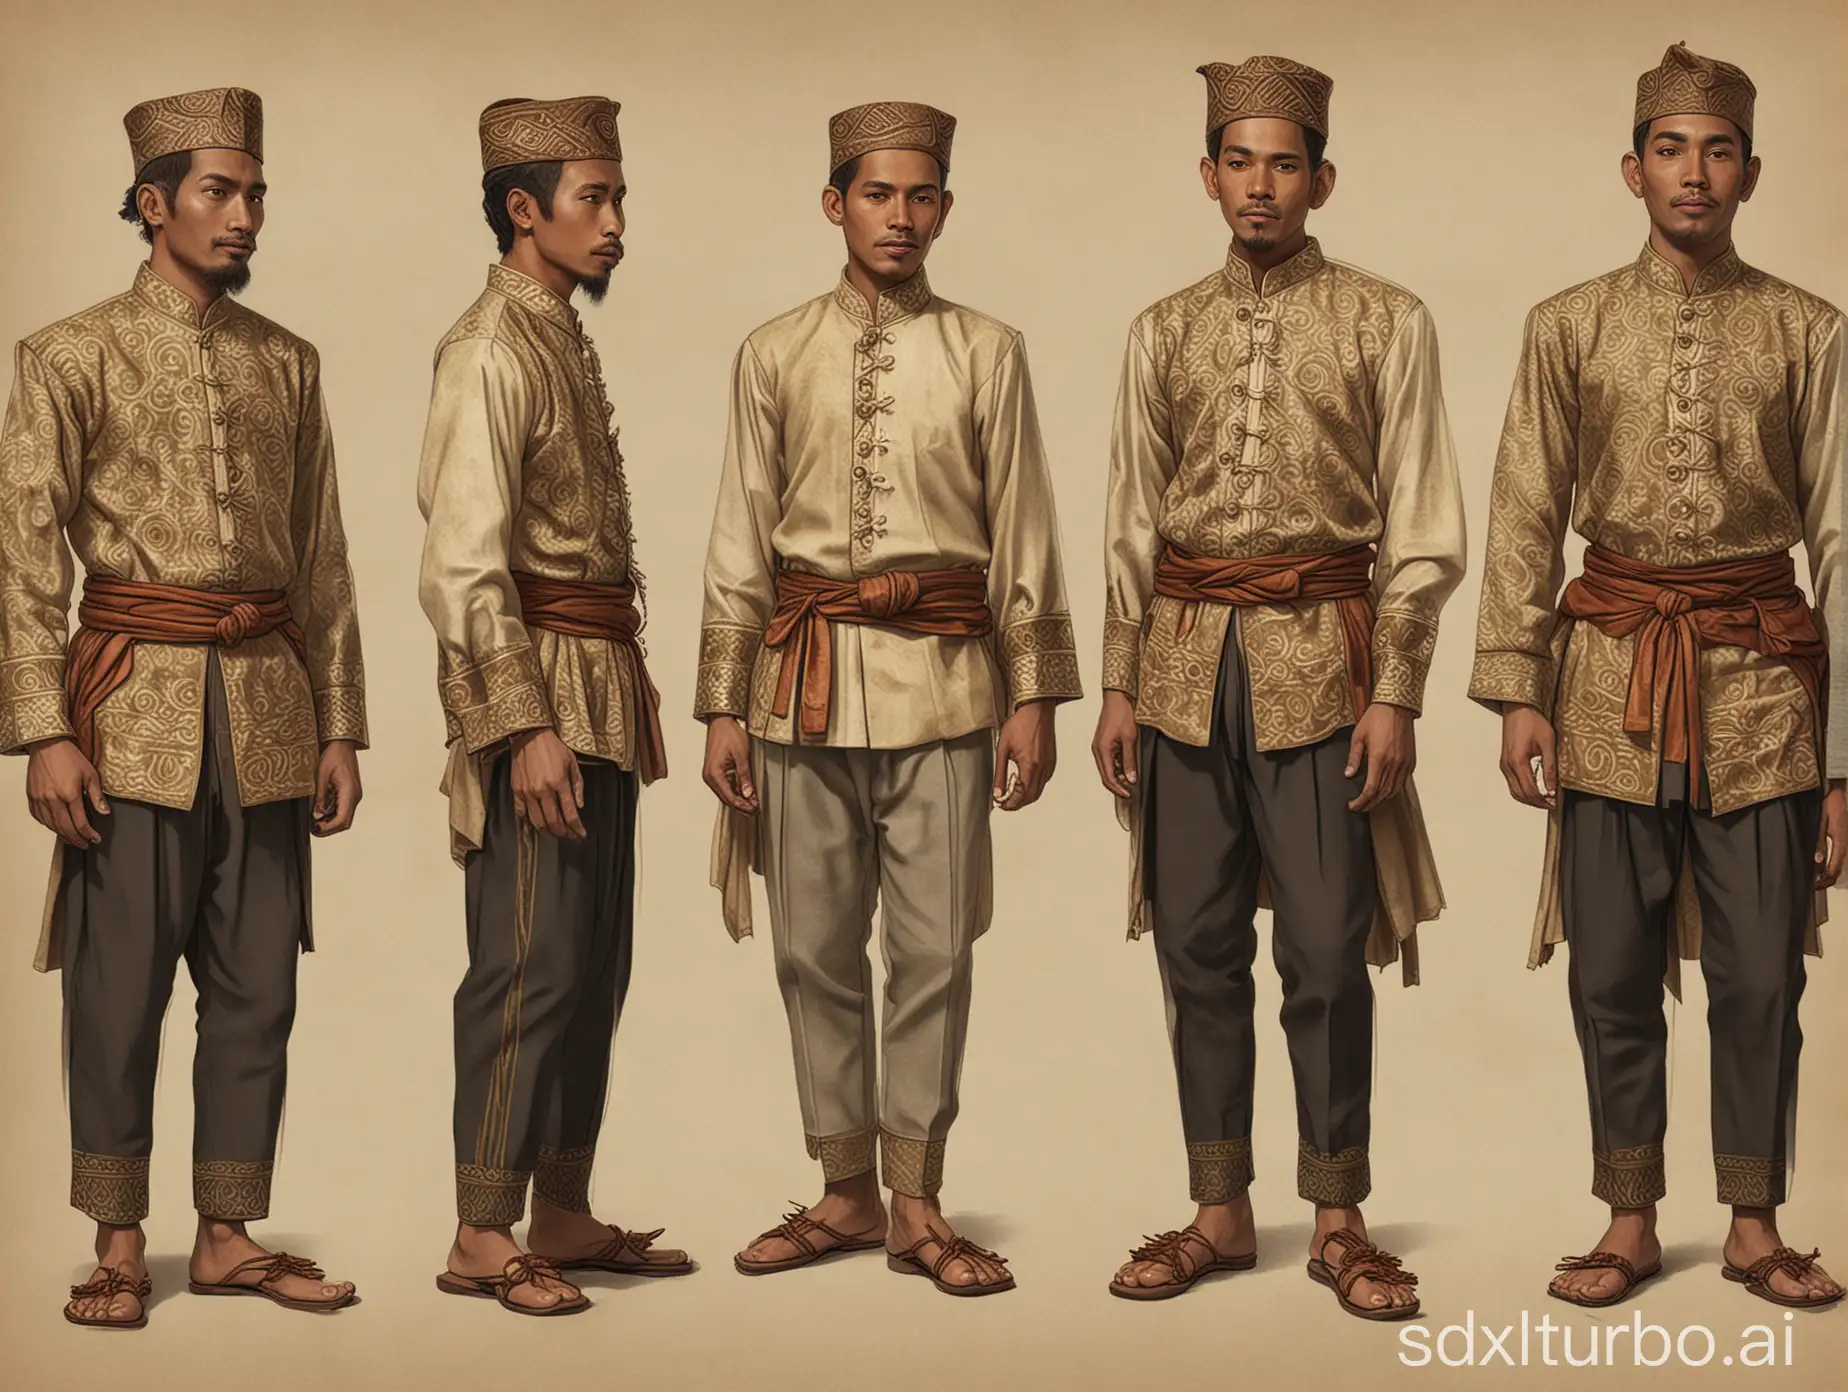 Traditional-Javanese-Mens-Attire-A-Diversity-of-Cultural-Garb